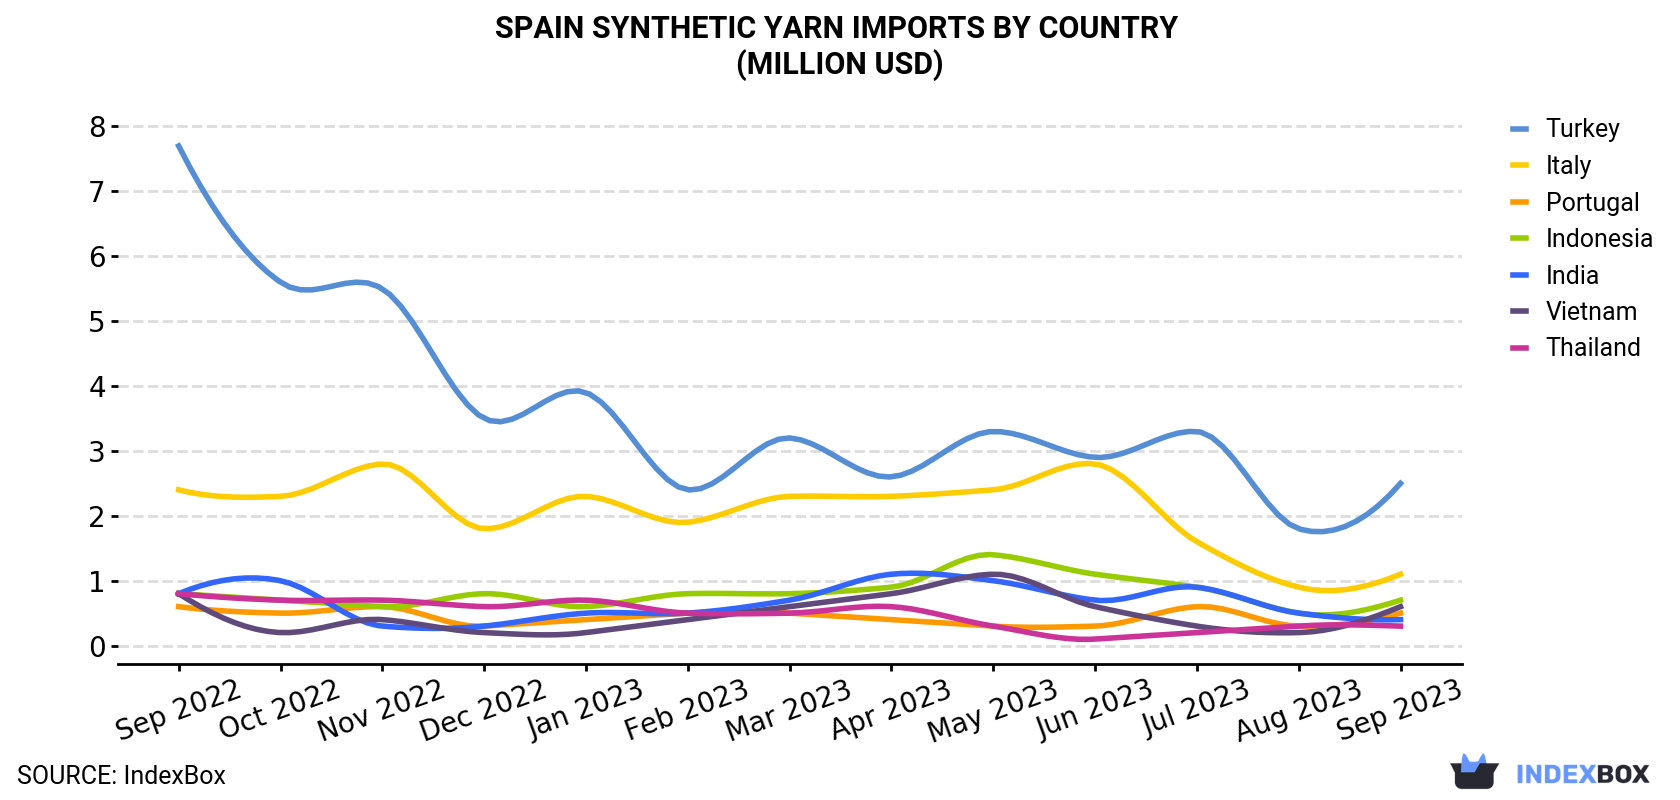 Spain Synthetic Yarn Imports By Country (Million USD)